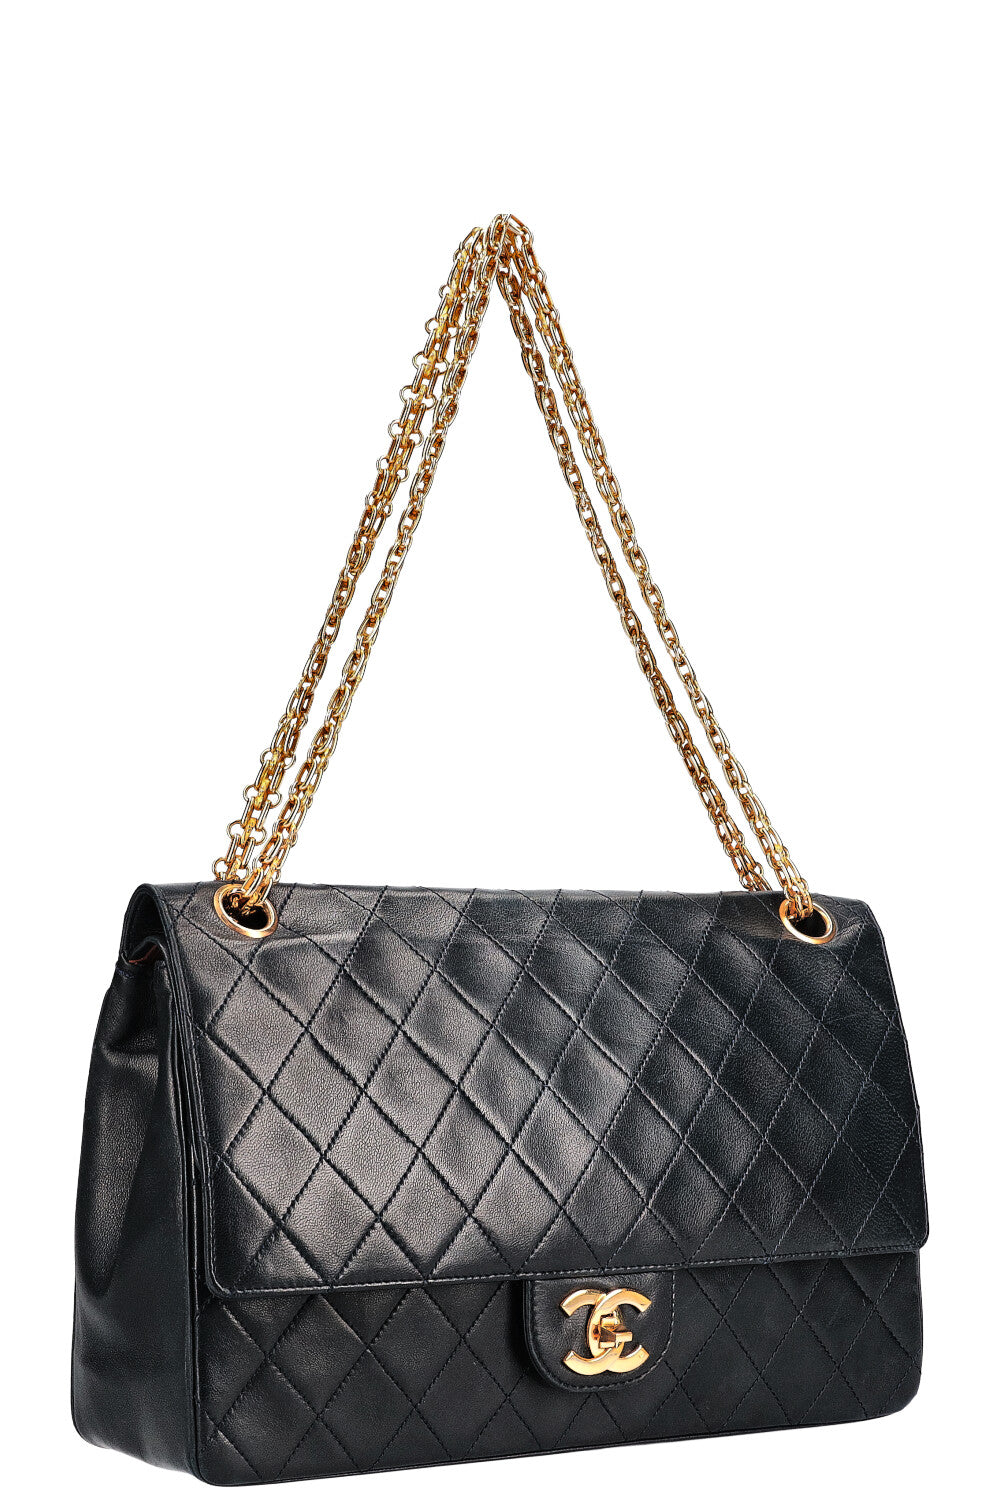 CHANEL Vintage Reissue Chain Double Flap Bag Midnight Blue